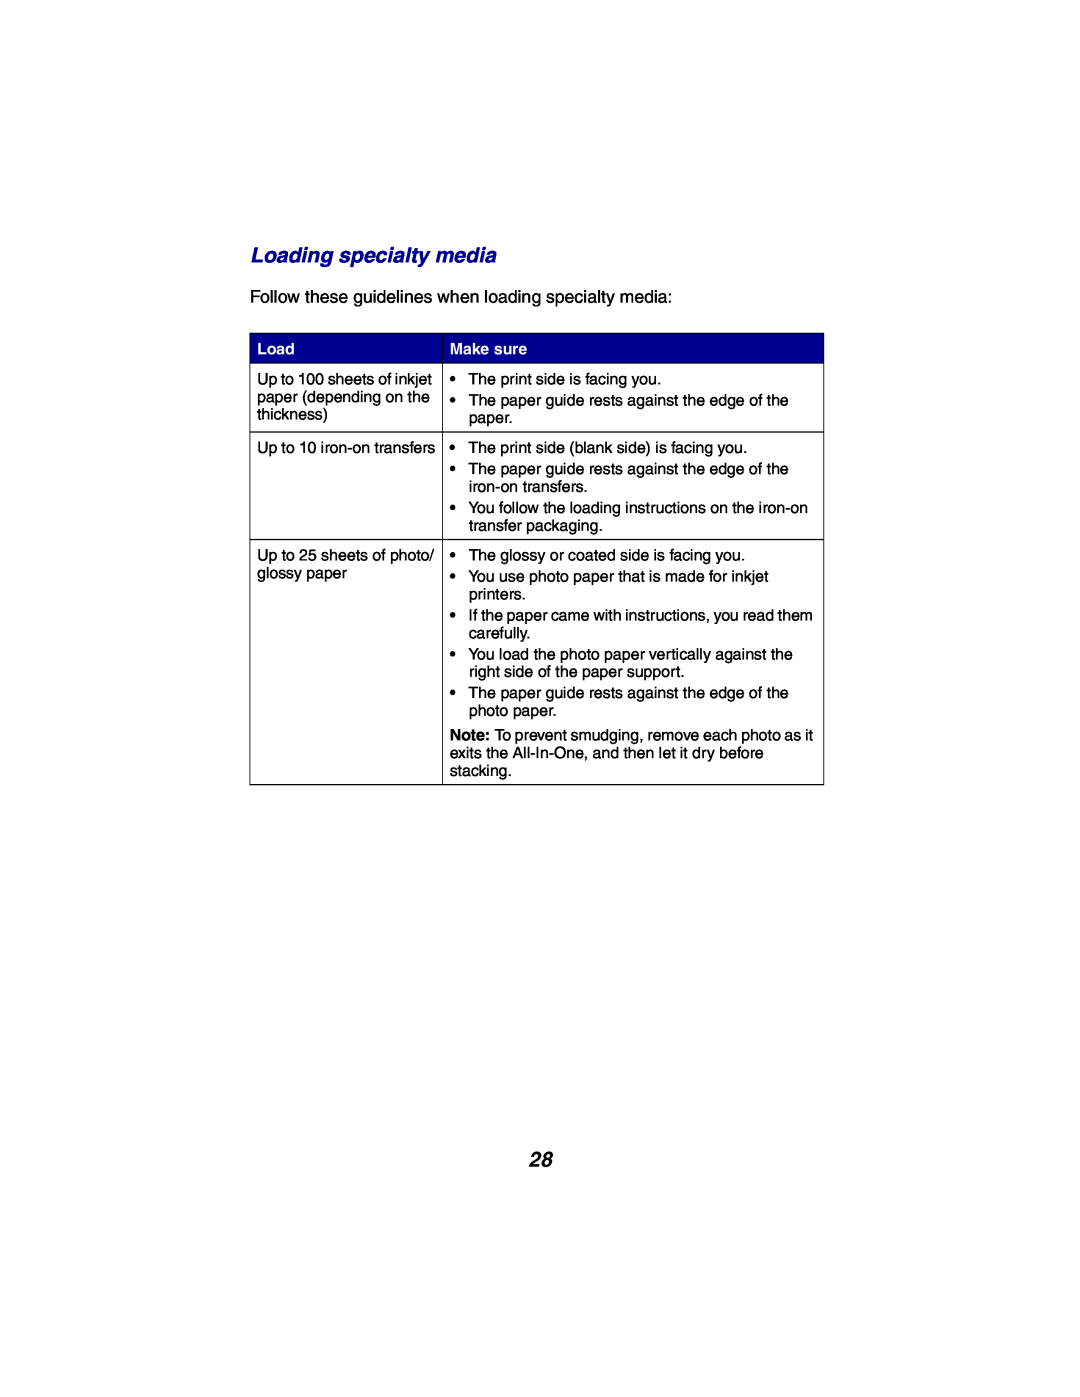 Lexmark X2300 Series manual Loading specialty media, Follow these guidelines when loading specialty media, Make sure 